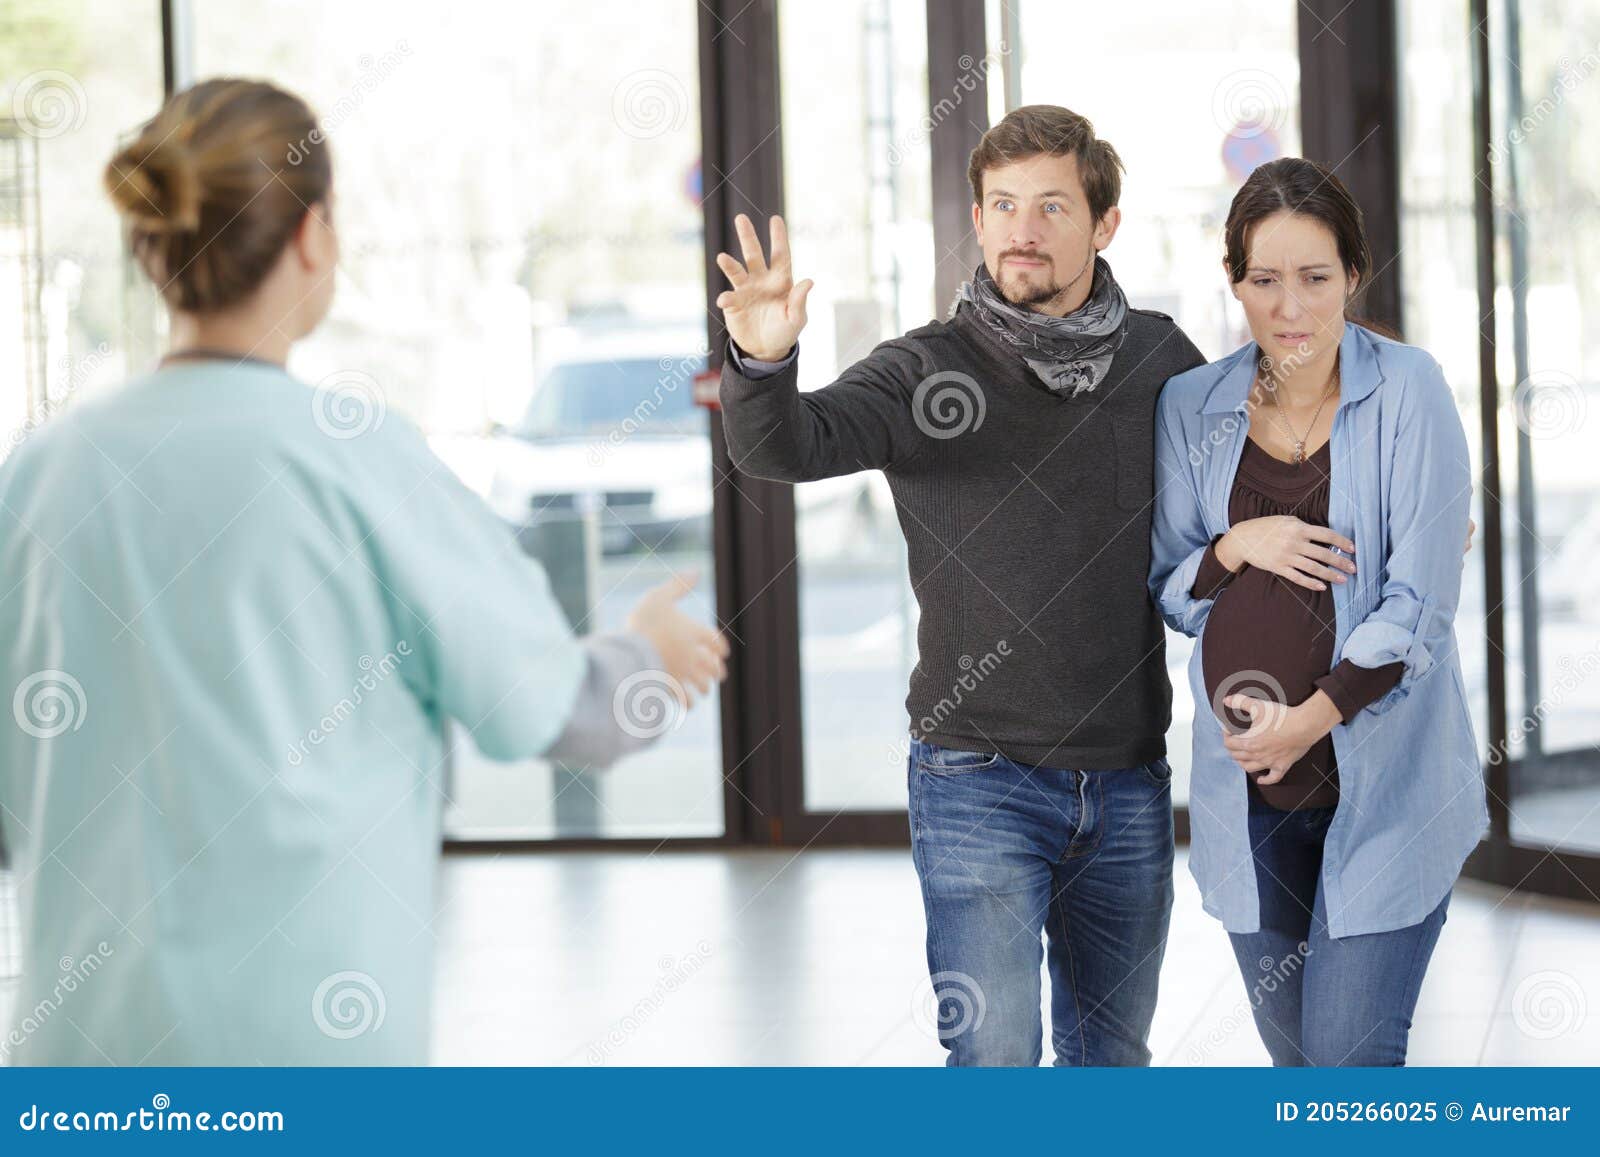 Doctor Vaccinating Young Pregnant Woman Stock Photo 